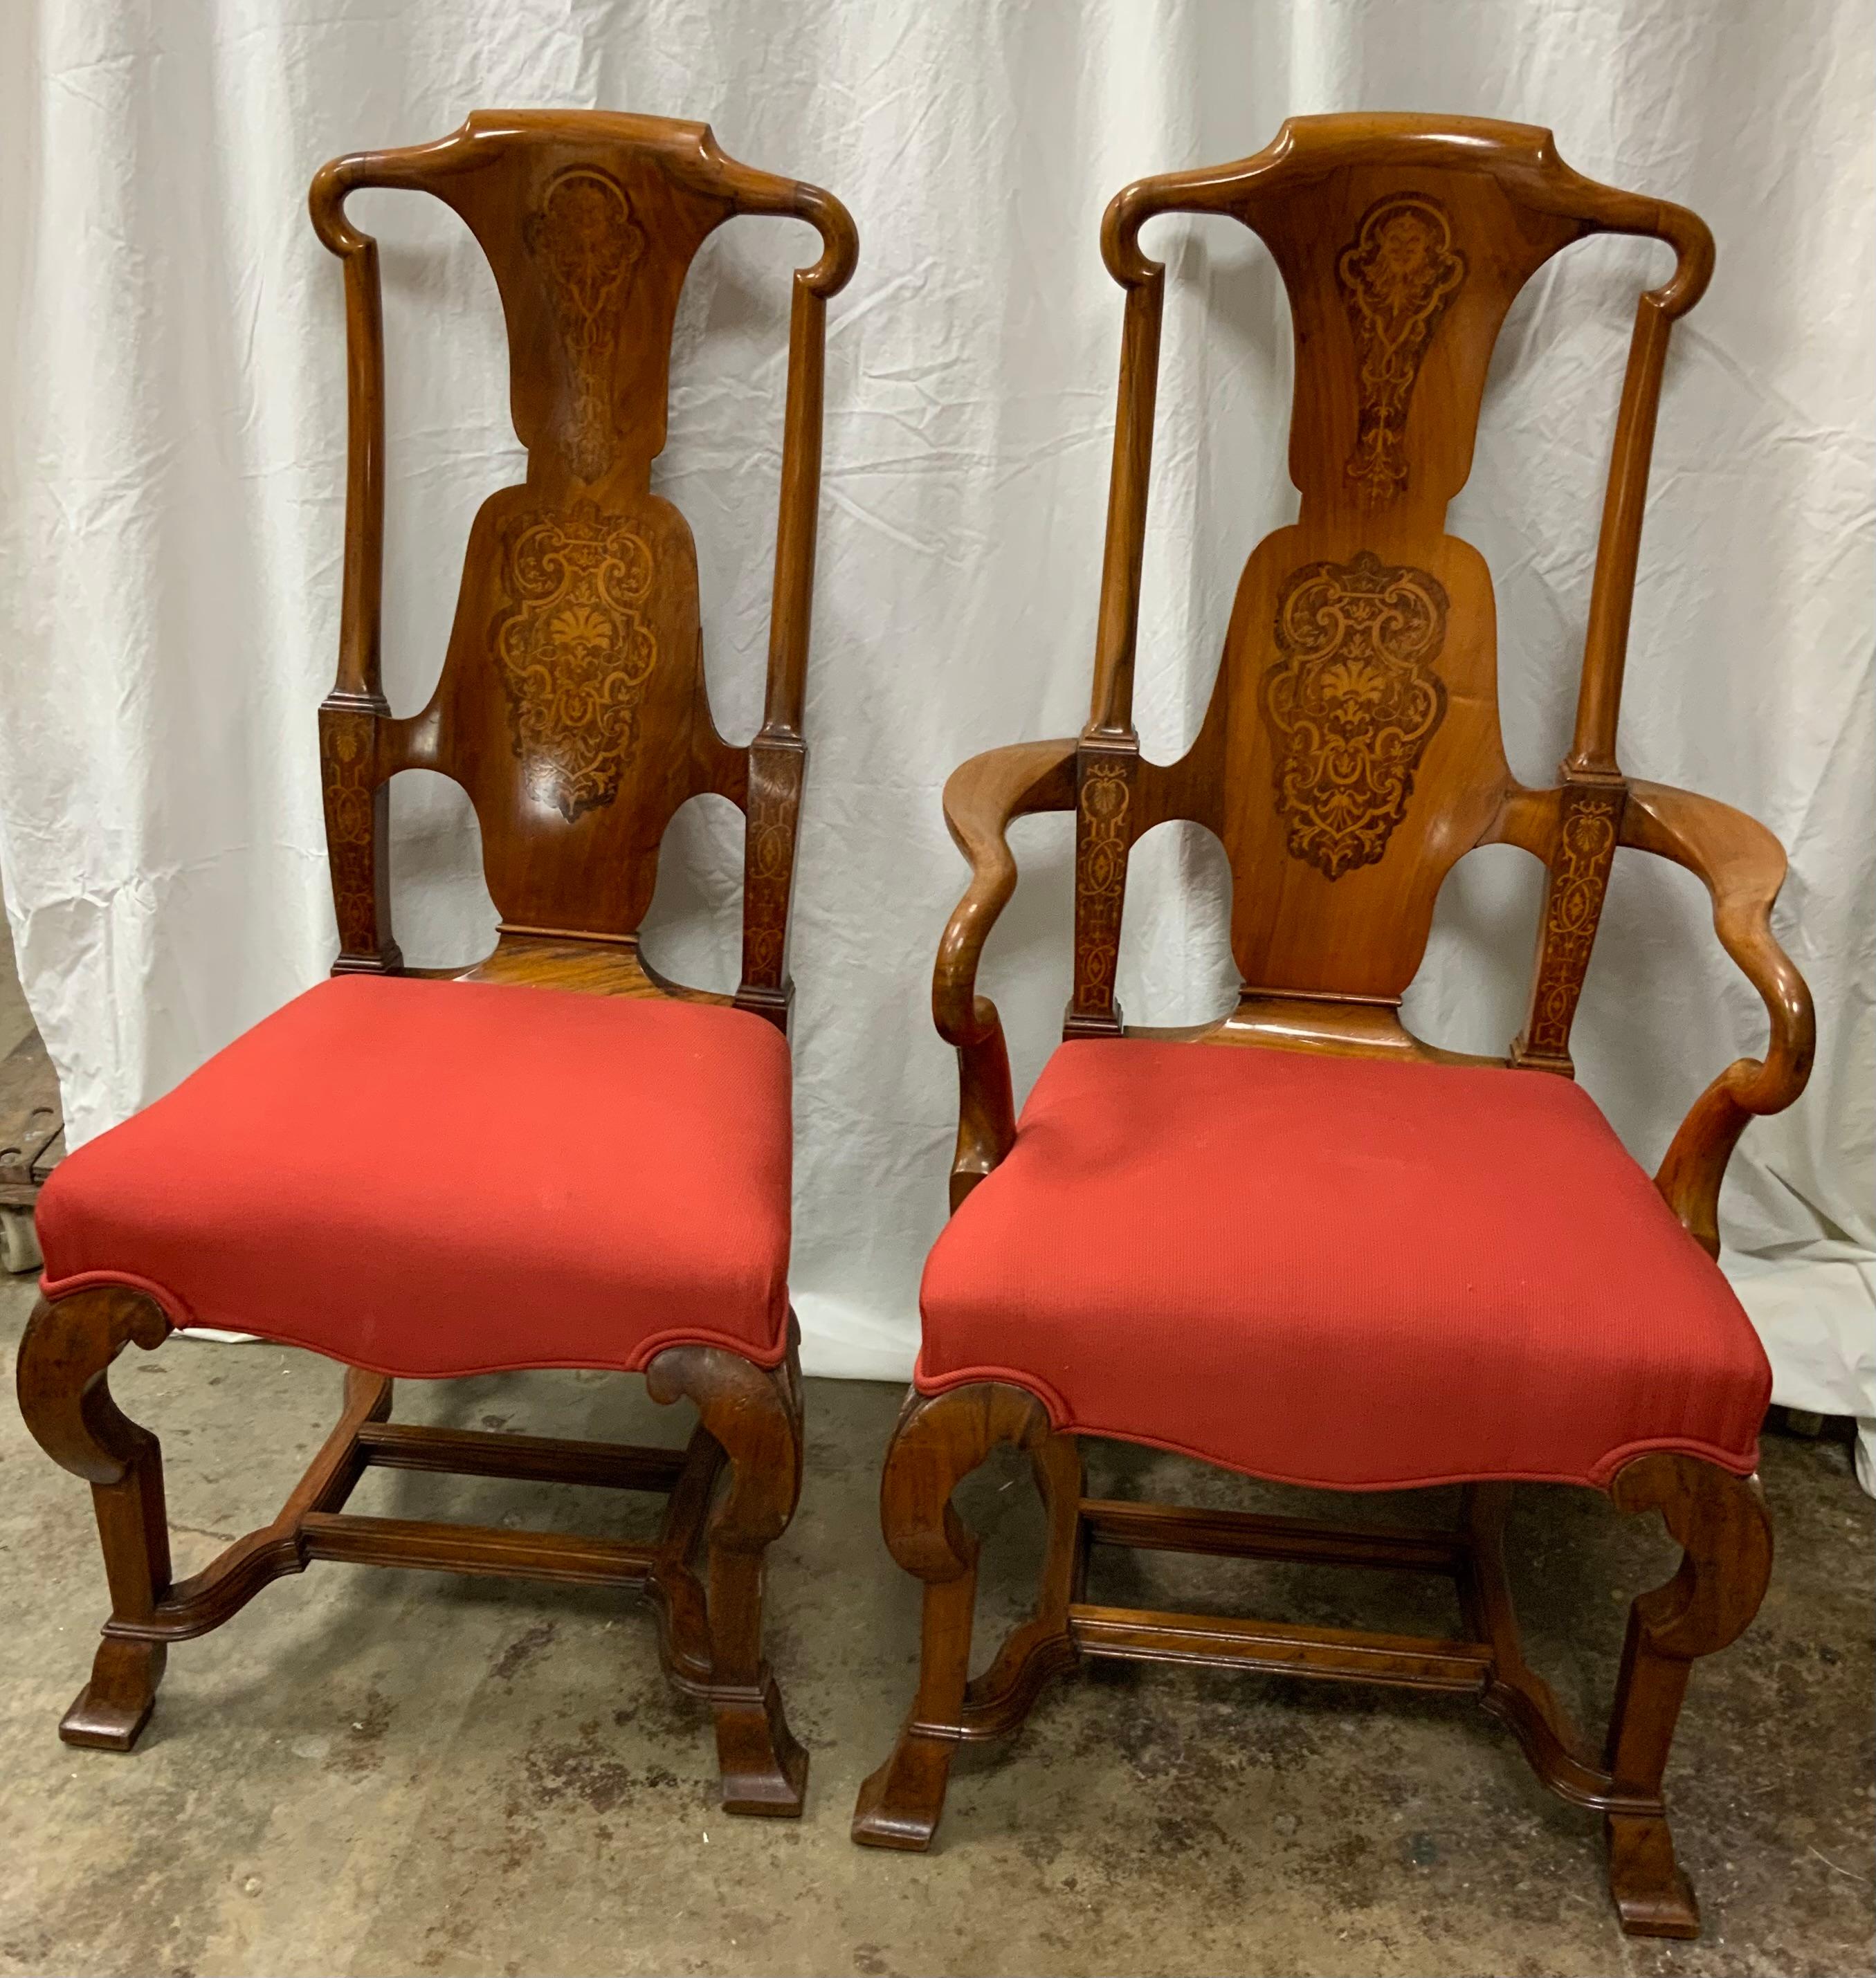 Set of 10 English dining chairs, 19 th c. Walnut with marquetry inlay For Sale 1